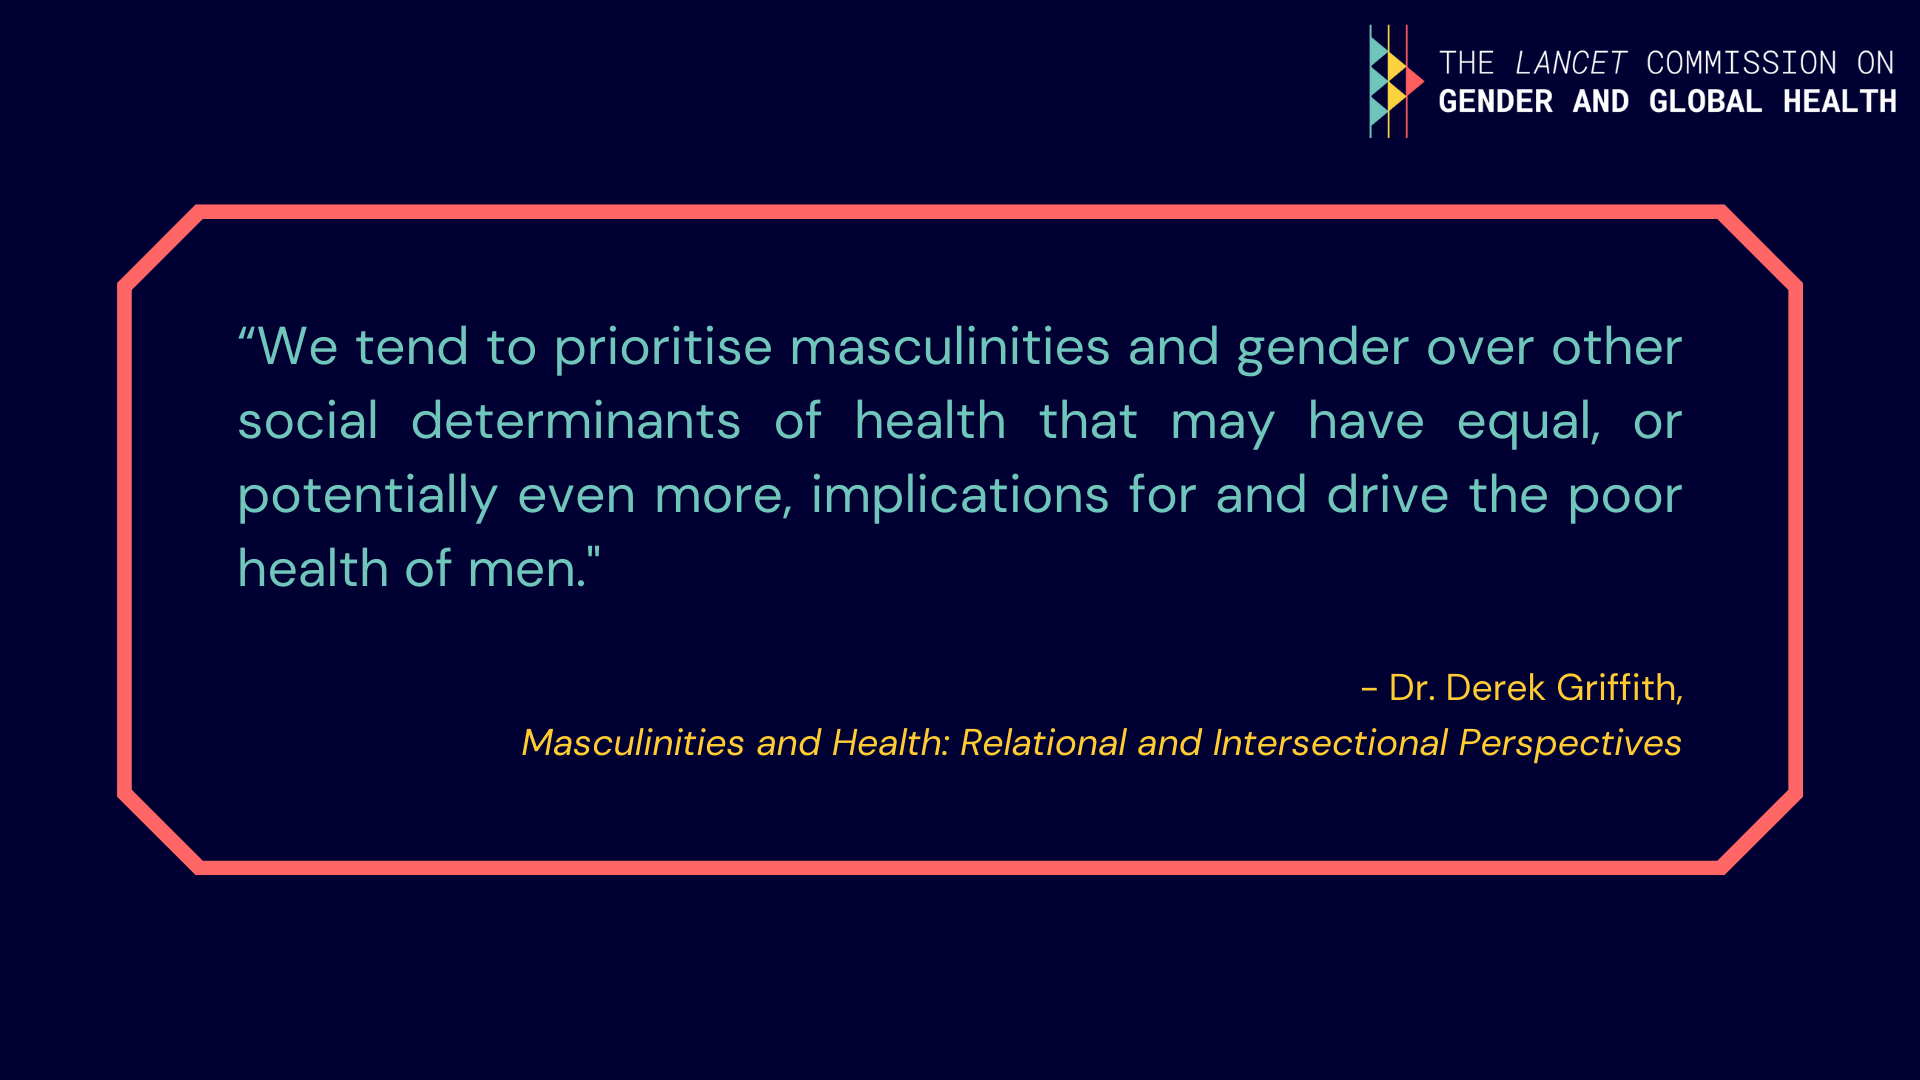 Derek Griffith: "We tend to prioritise masculinities and gender over other social determinants of health that may have equal, or potentially even more, implications for and drive the poor health of men".